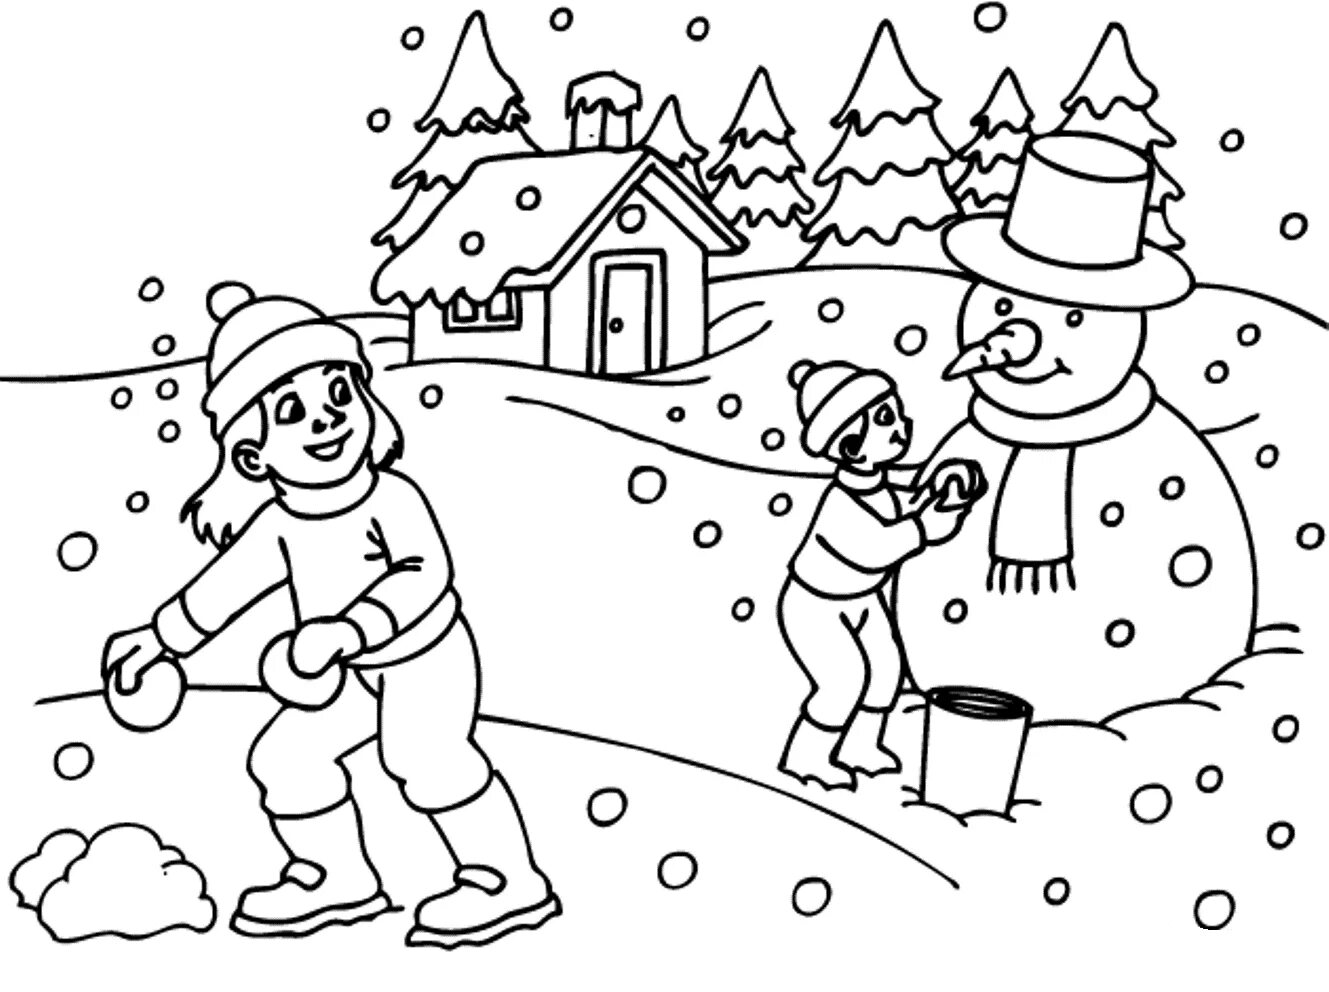 Peaceful december coloring book for kids